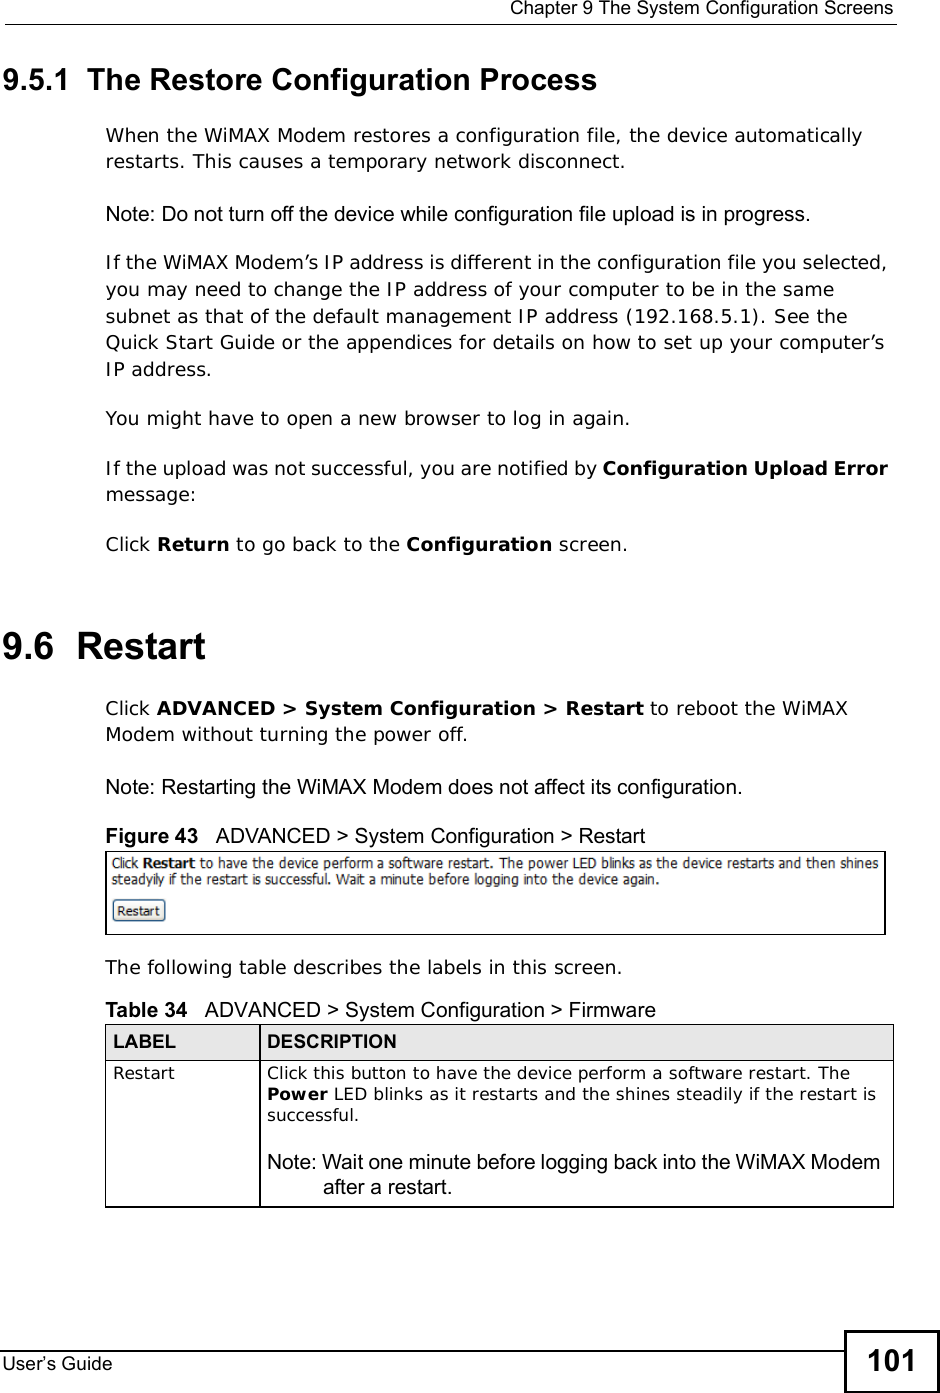  Chapter 9The System Configuration ScreensUser s Guide 1019.5.1  The Restore Configuration ProcessWhen the WiMAX Modem restores a configuration file, the device automatically restarts. This causes a temporary network disconnect. Note: Do not turn off the device while configuration file upload is in progress.If the WiMAX Modem’s IP address is different in the configuration file you selected, you may need to change the IP address of your computer to be in the same subnet as that of the default management IP address (192.168.5.1). See the Quick Start Guide or the appendices for details on how to set up your computer’s IP address.You might have to open a new browser to log in again.If the upload was not successful, you are notified by Configuration Upload Errormessage:Click Return to go back to the Configuration screen.9.6  RestartClick ADVANCED &gt; System Configuration &gt; Restart to reboot the WiMAX Modem without turning the power off.Note: Restarting the WiMAX Modem does not affect its configuration.Figure 43   ADVANCED &gt; System Configuration &gt; RestartThe following table describes the labels in this screen.    Table 34   ADVANCED &gt; System Configuration &gt; FirmwareLABEL DESCRIPTIONRestart Click this button to have the device perform a software restart. The Power LED blinks as it restarts and the shines steadily if the restart is successful.Note: Wait one minute before logging back into the WiMAX Modem after a restart.